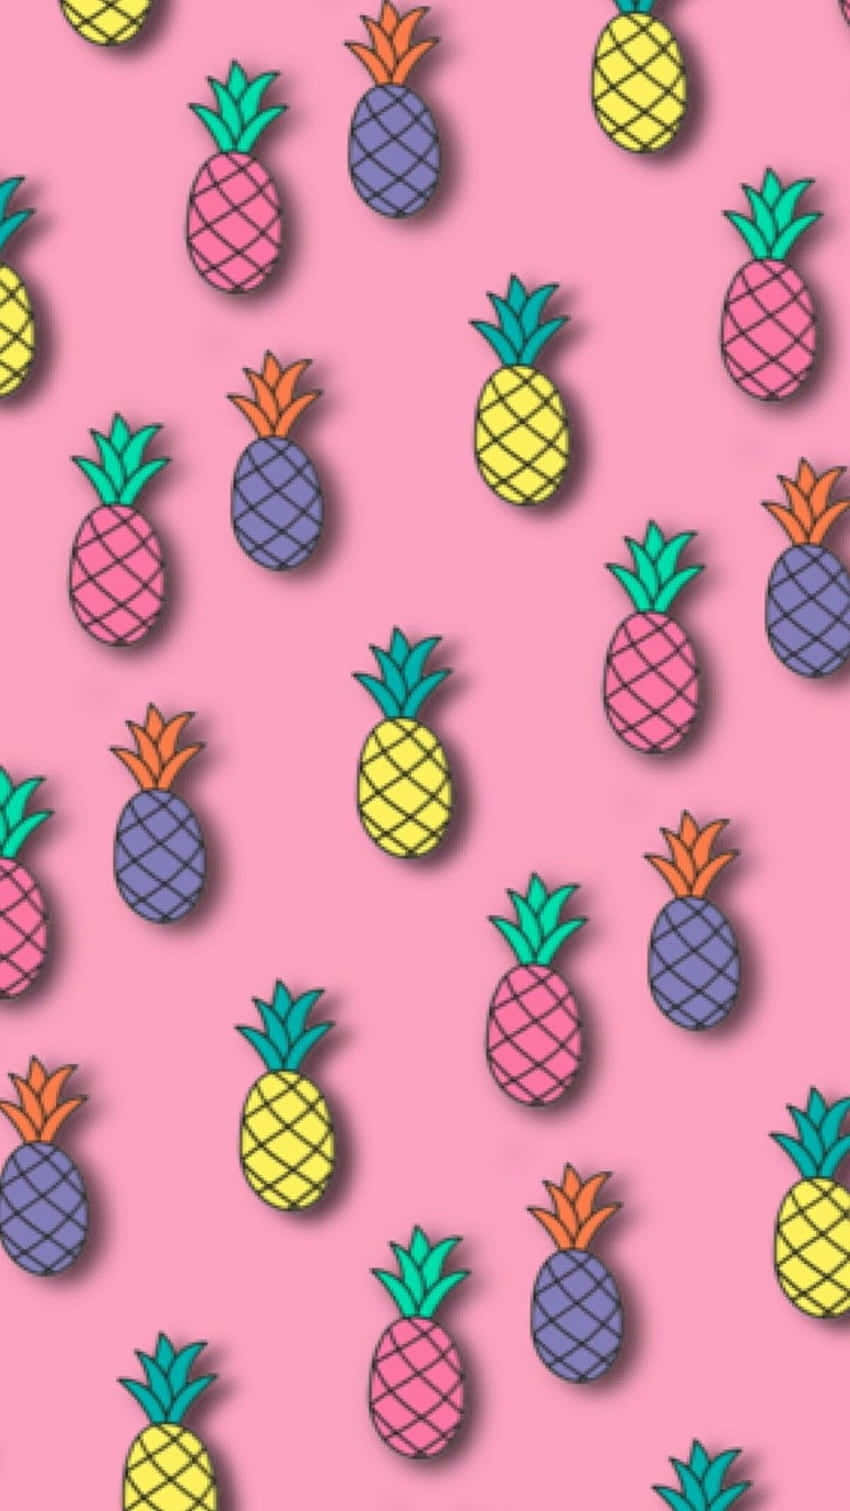 Download Paper Pineapple Drawing Watercolor Painting Illustration - Cute  Tumblr Watercolor Drawings PNG Image with No Background - PNGkey.com